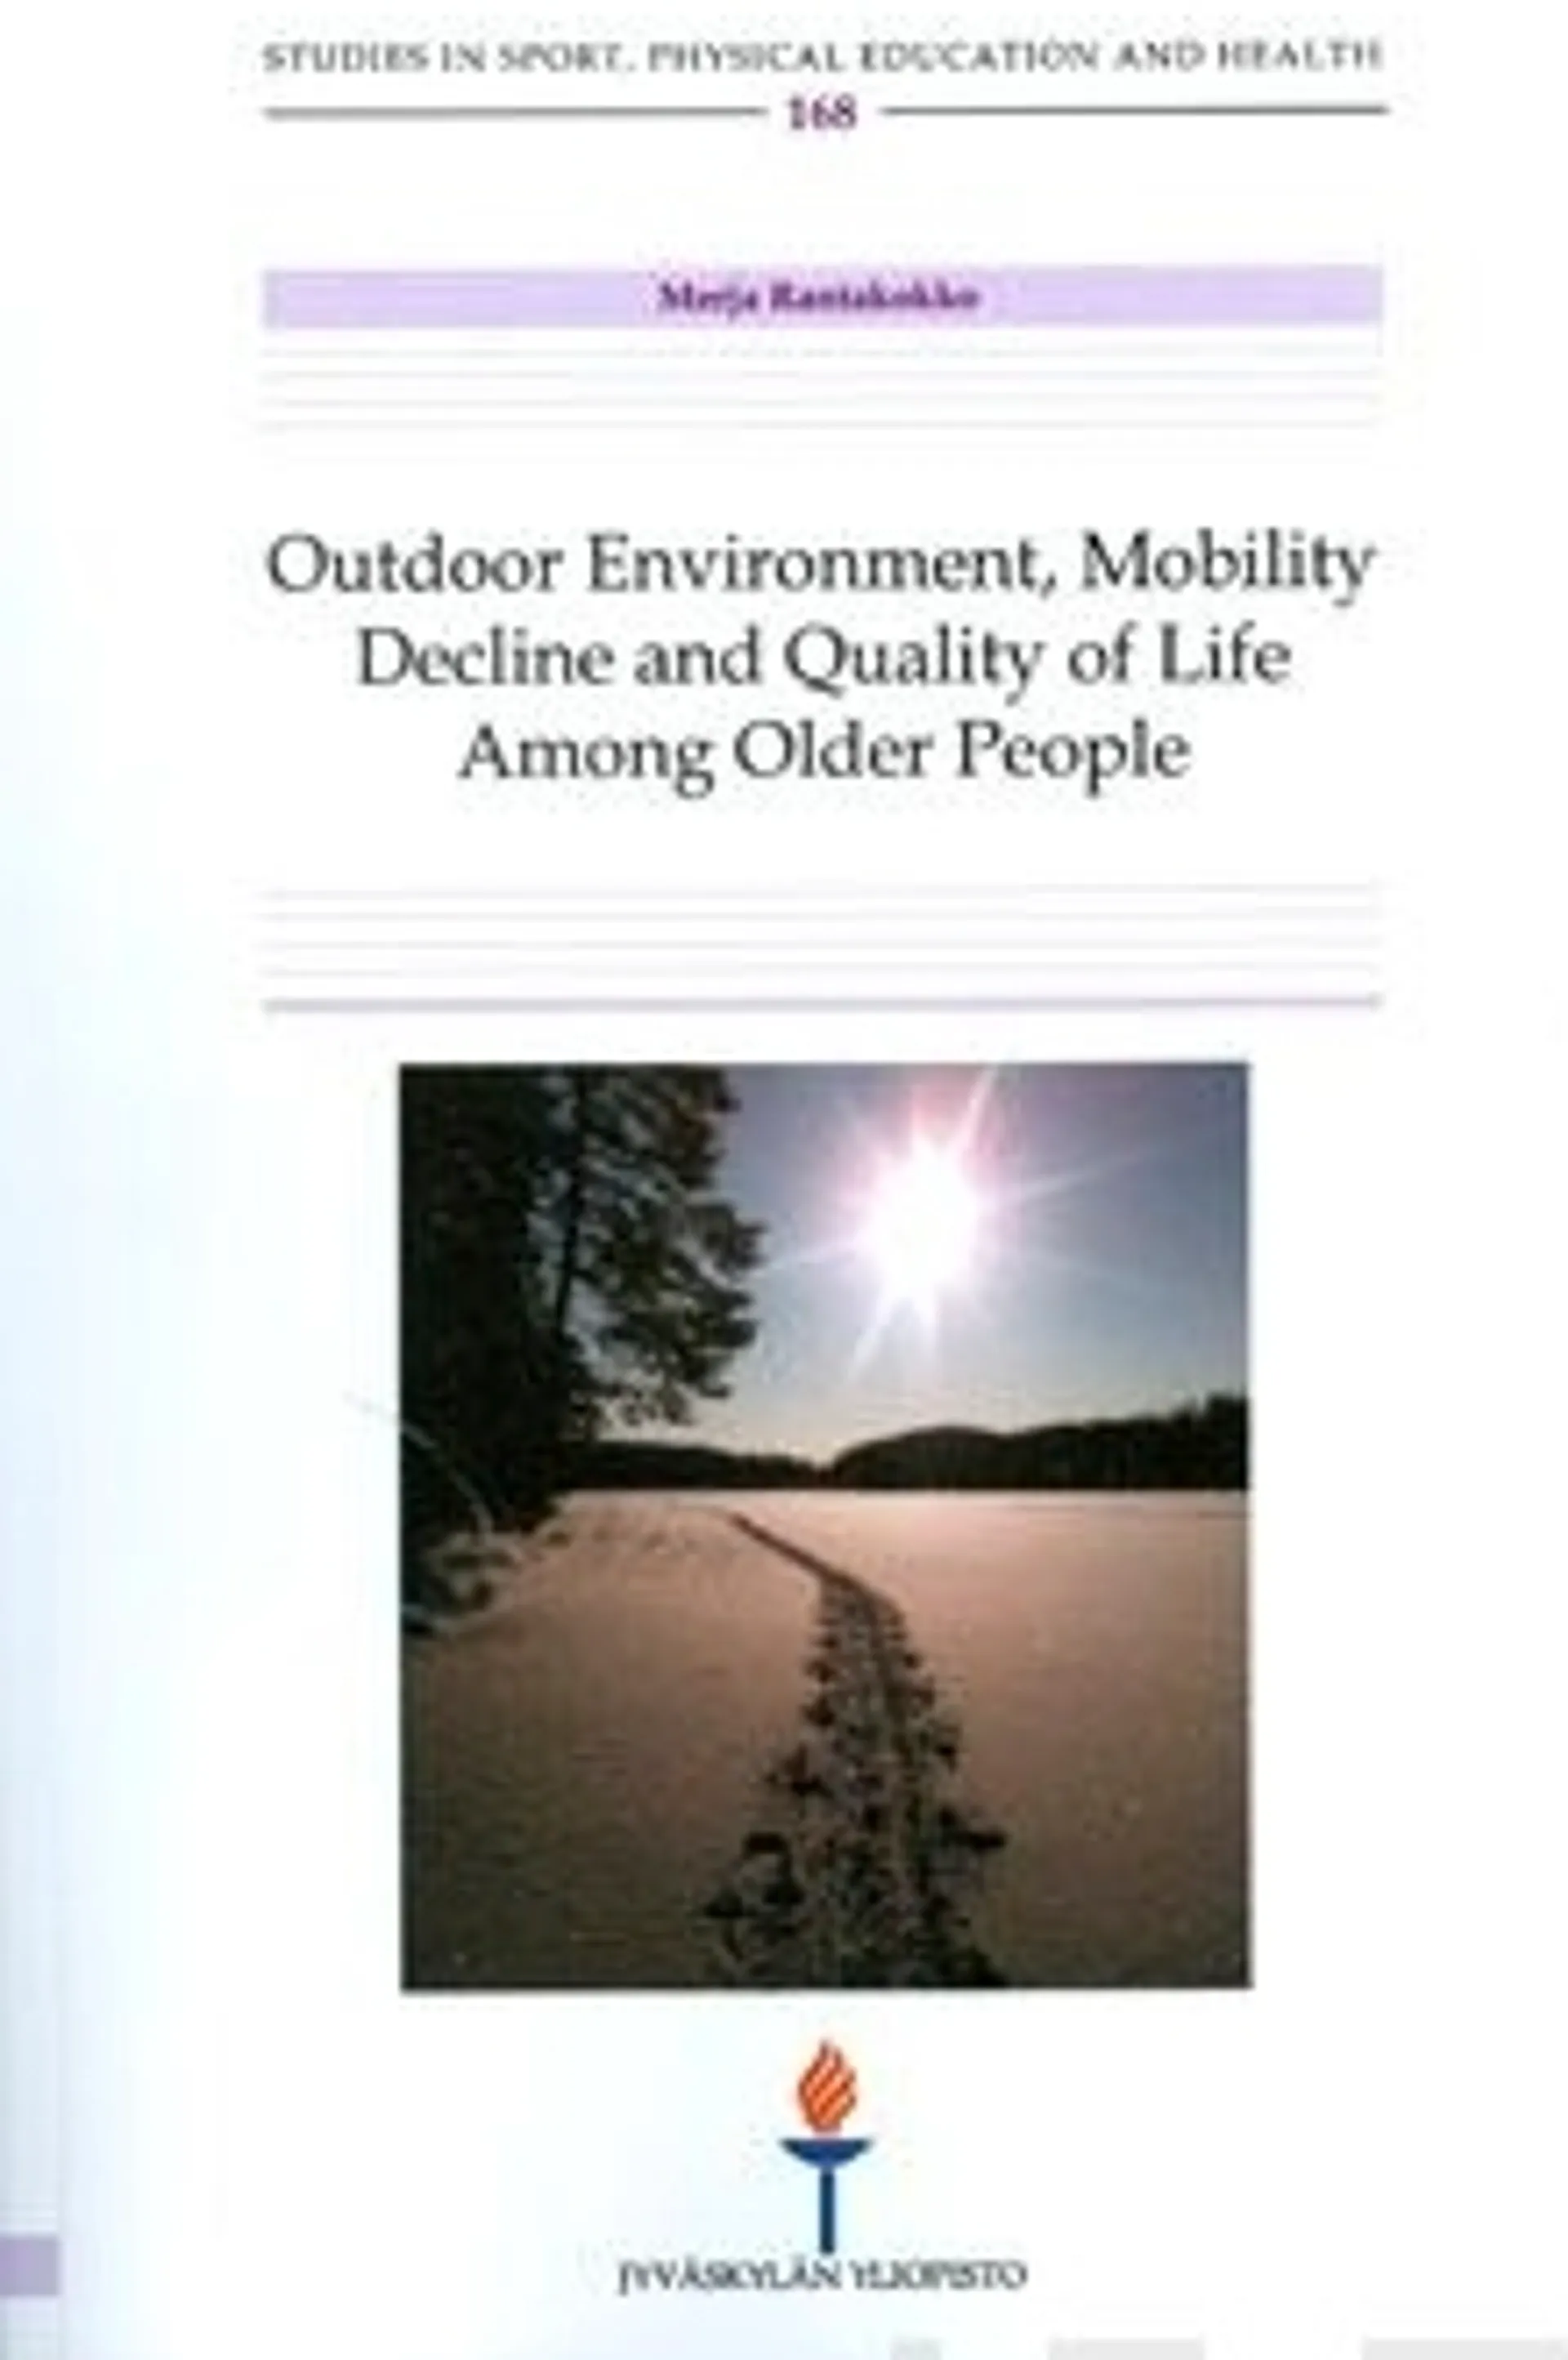 Rantakokko, Outdoor environment, mobility decline and quality of life among older people